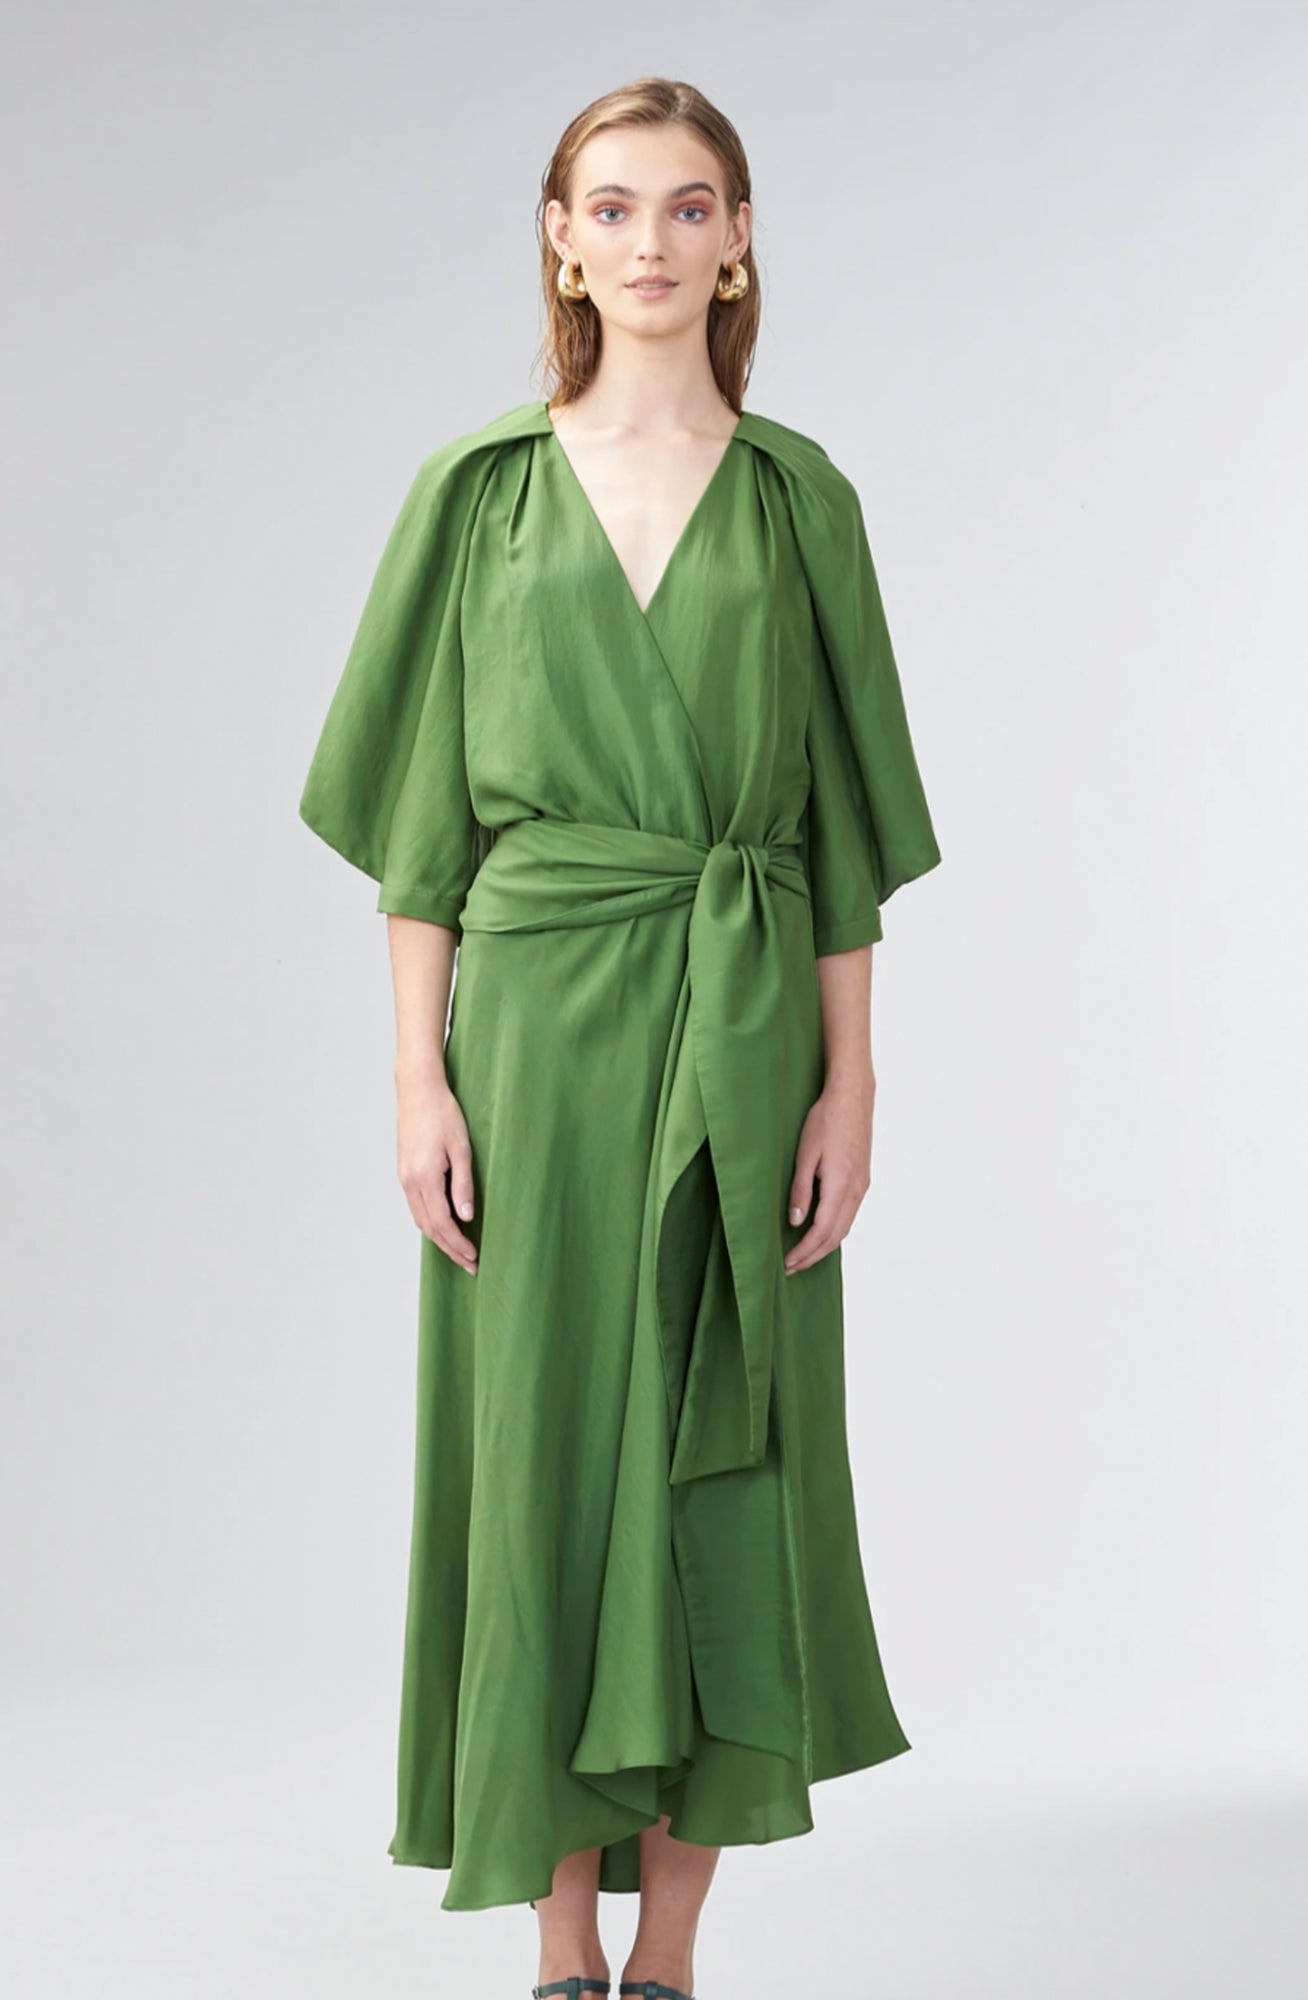 Easel Wrap Dress by Ginger & Smart for Hire | High St. Hire